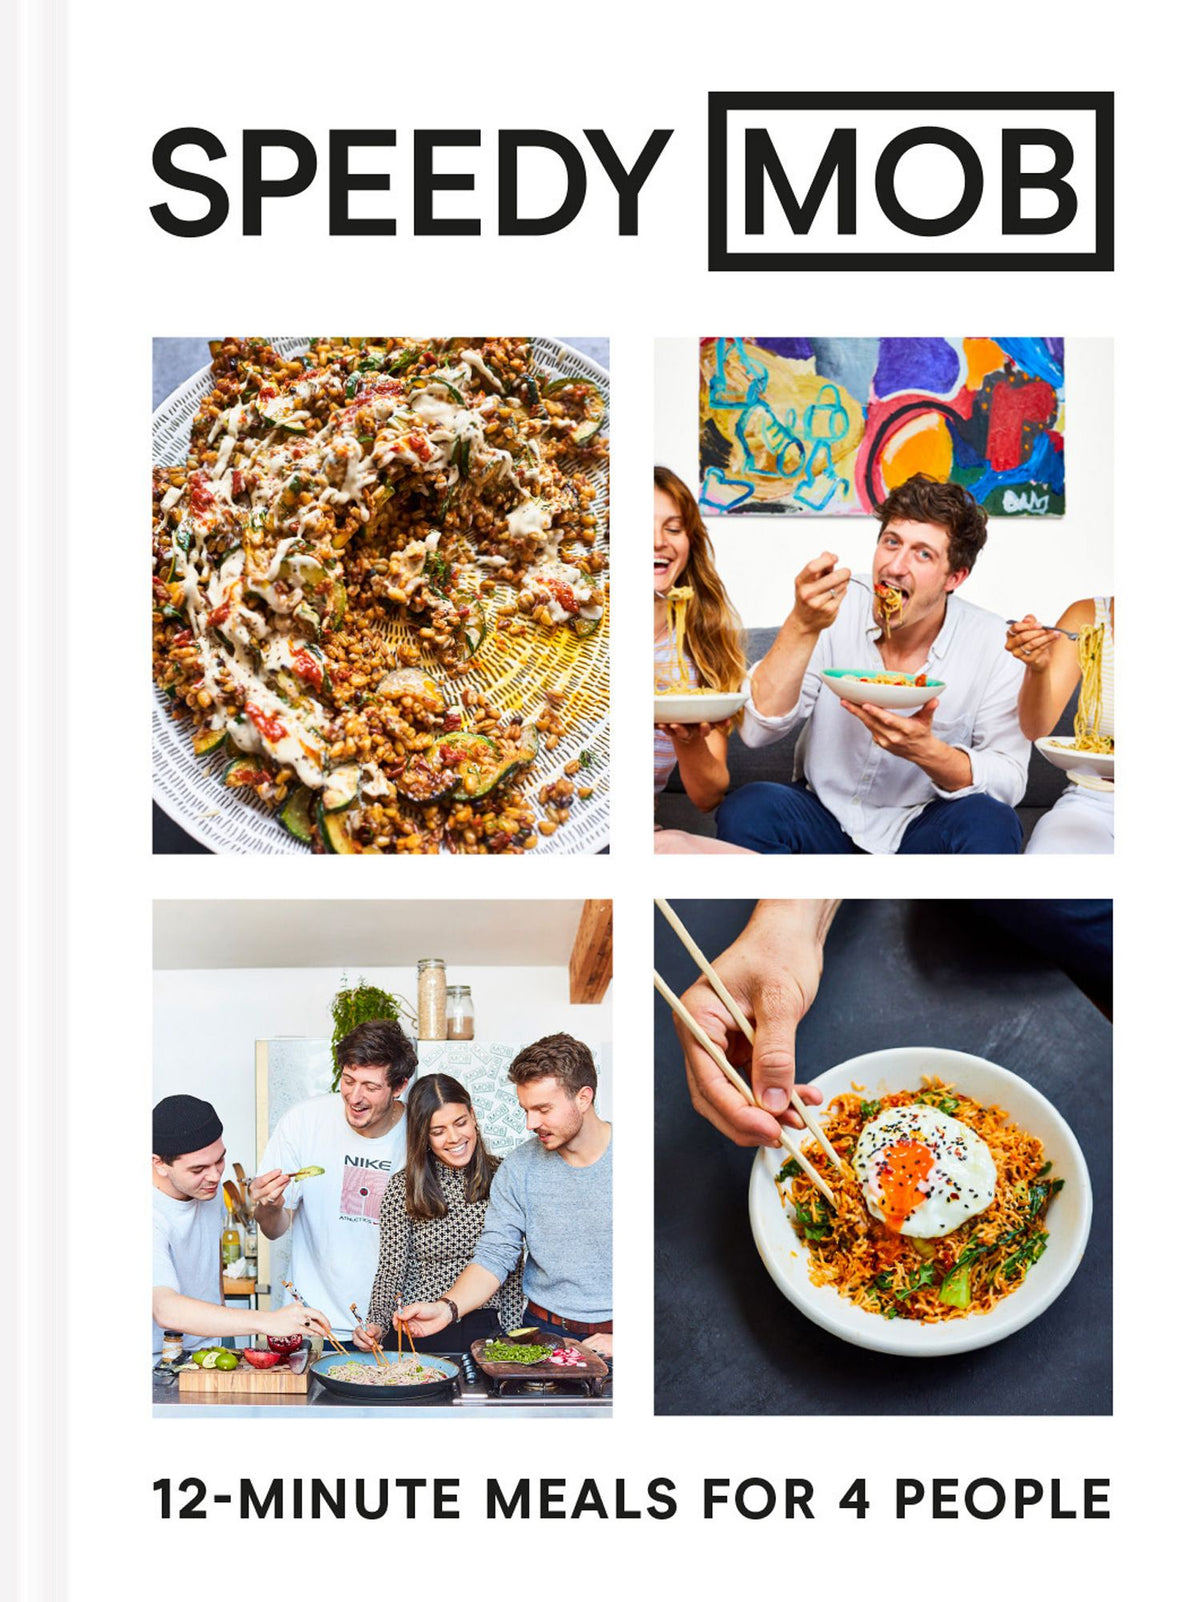 Speedy MOB - 12-Minute Meals for 4 People